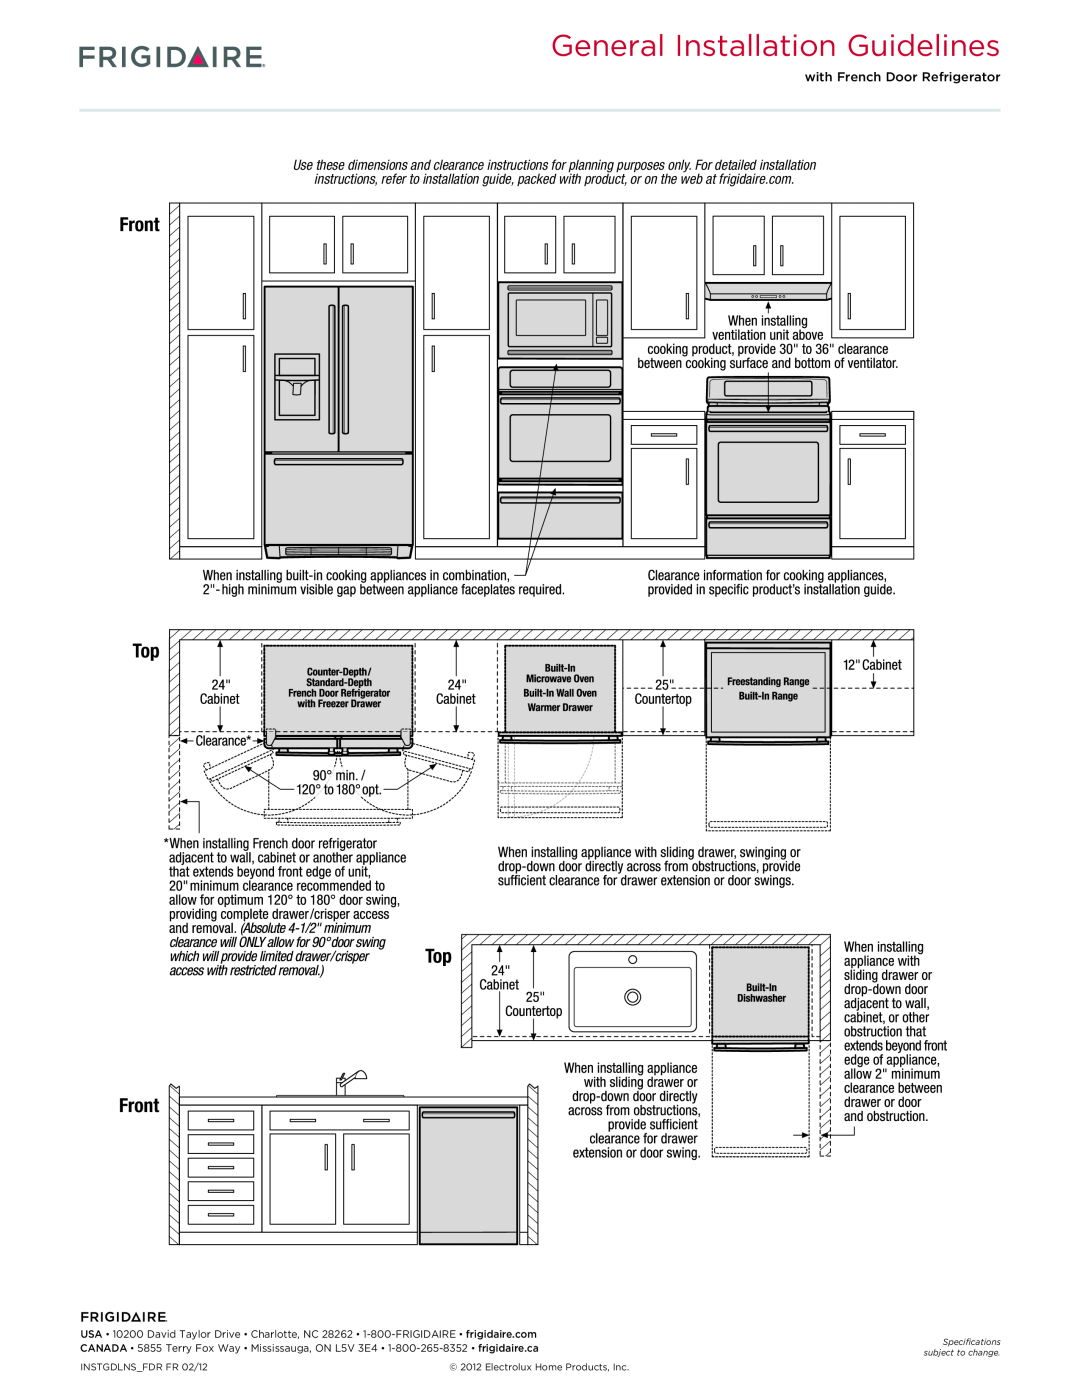 Frigidaire FPET2785K F dimensions Front Top Top Front, General Installation Guidelines, with French Door Refrigerator 